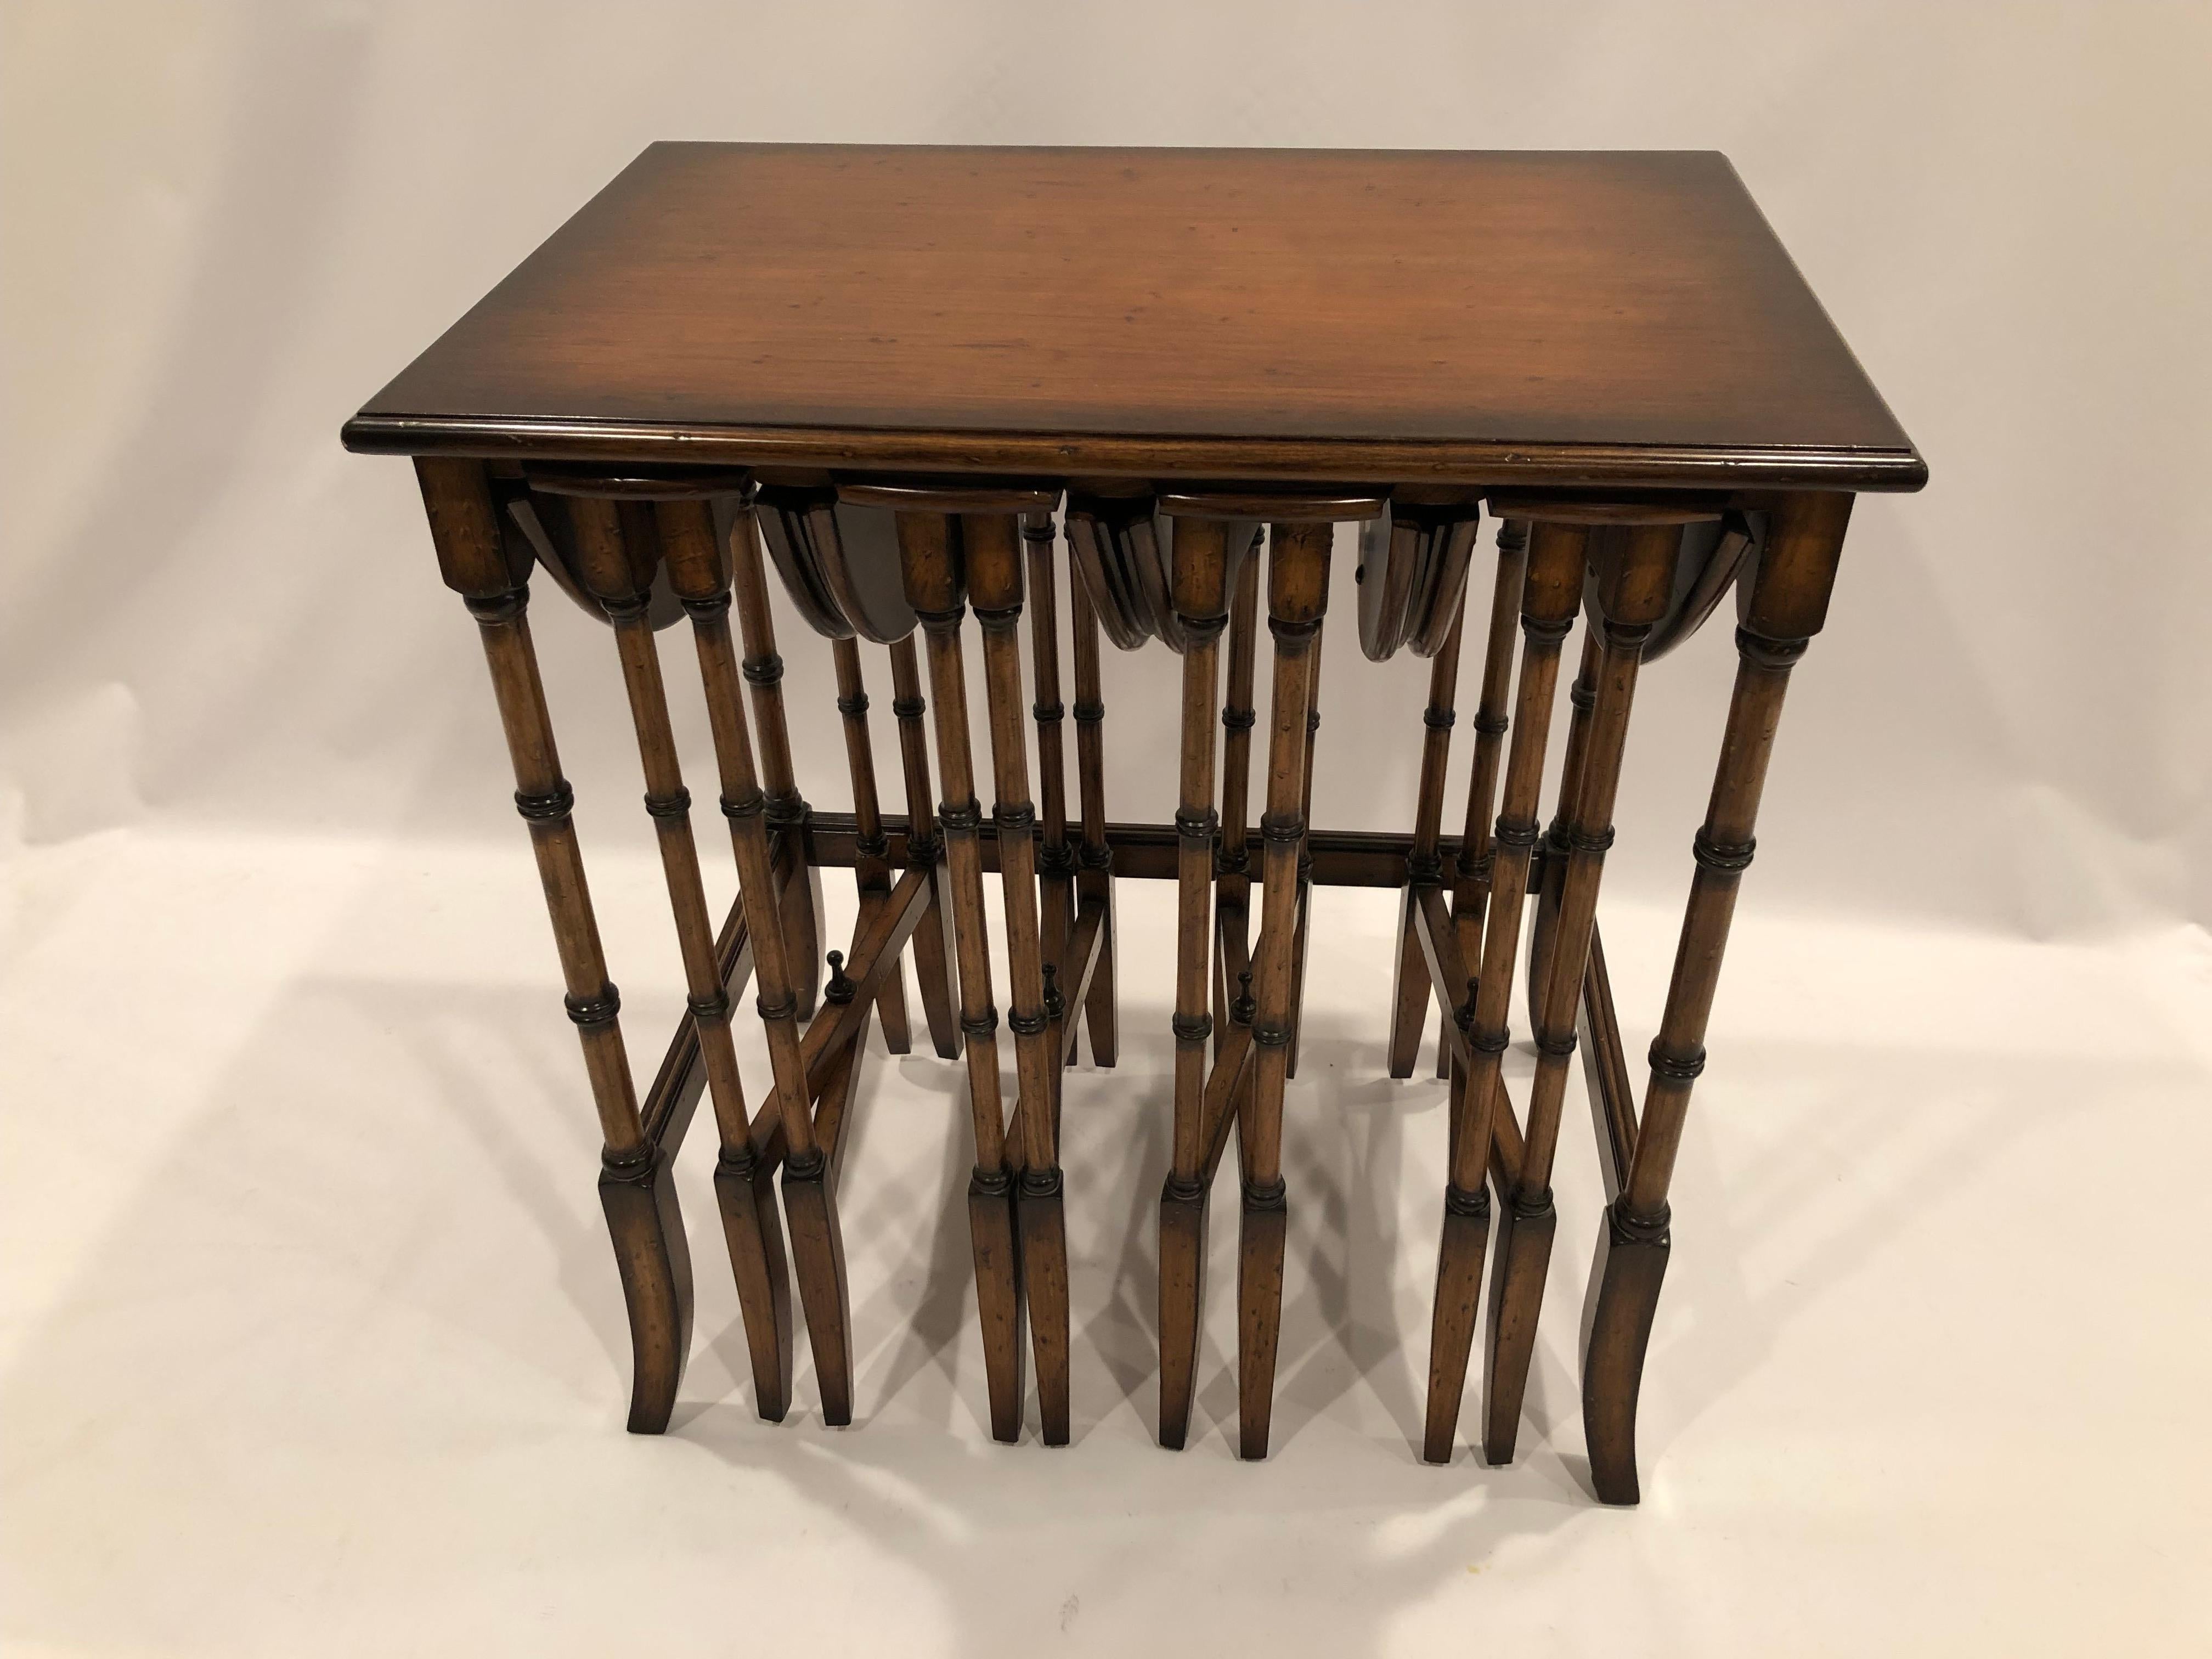 Beautifully made versatile set of walnut nesting tables having a single rectangular table with clever space for 4 smaller tables to slide under like plates in a plate rack. Each hidden table has drop leaves that open to make 4 lovely round tables